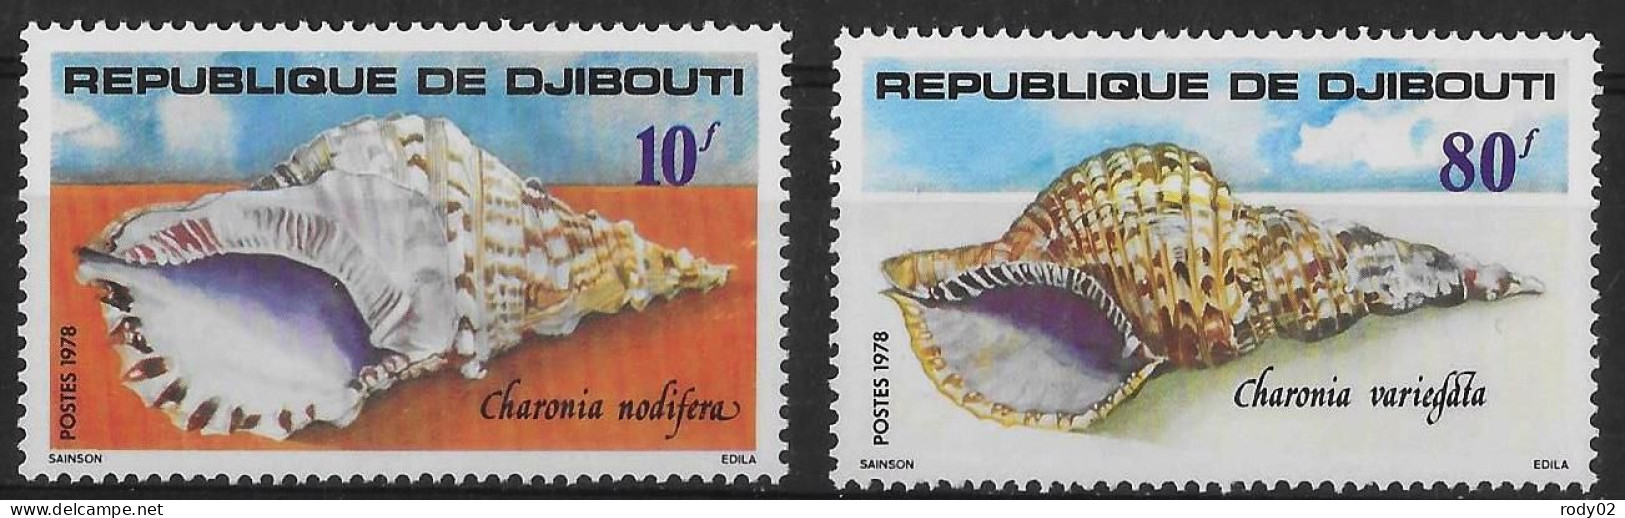 DJIBOUTI - COQUILLAGES - N° 486 ET 487 - NEUF** MNH - Coneshells